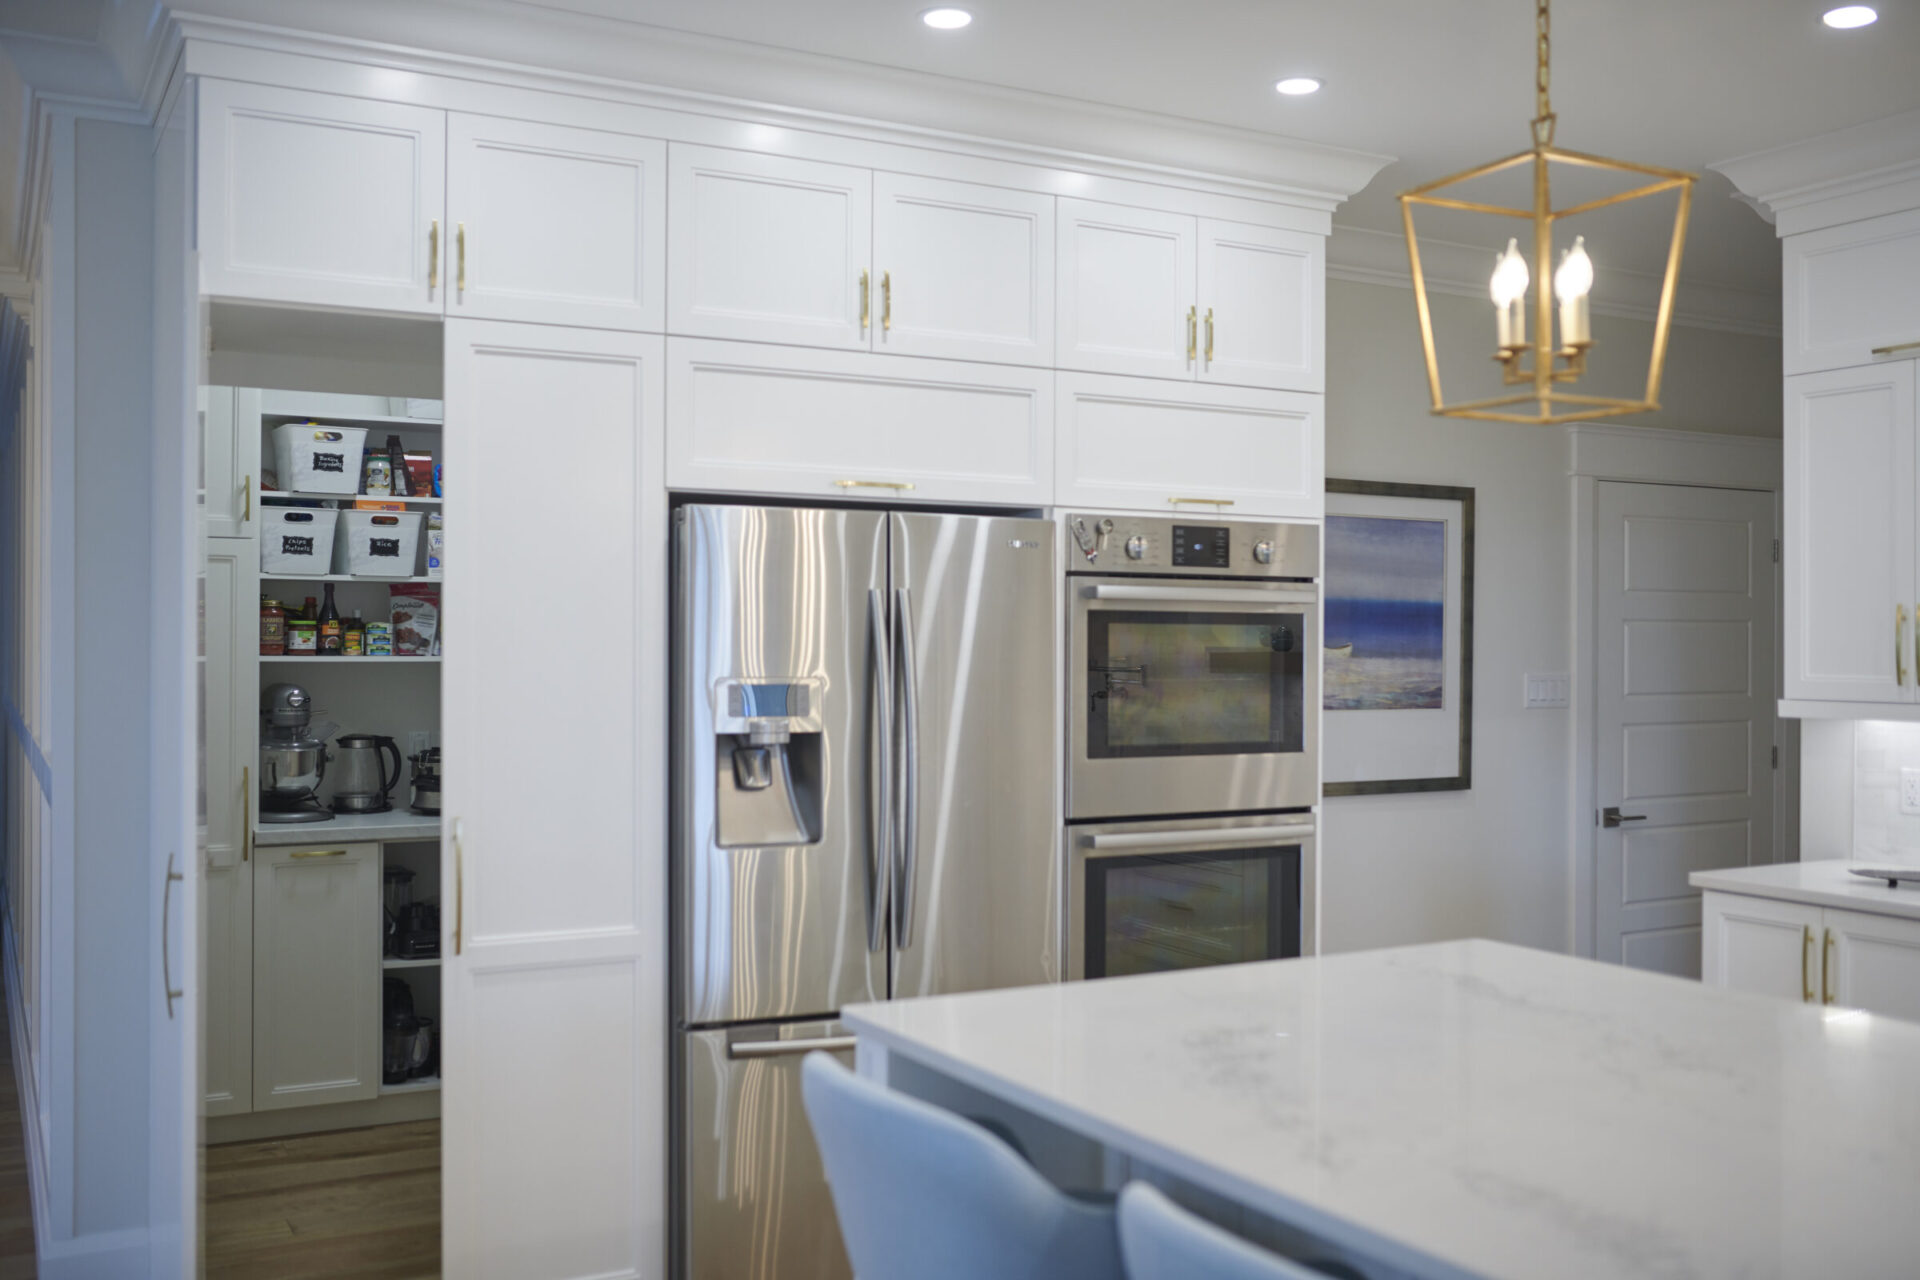 A modern kitchen with white cabinetry, stainless steel appliances, a marble countertop island, blue chairs, and a geometric chandelier overhead.